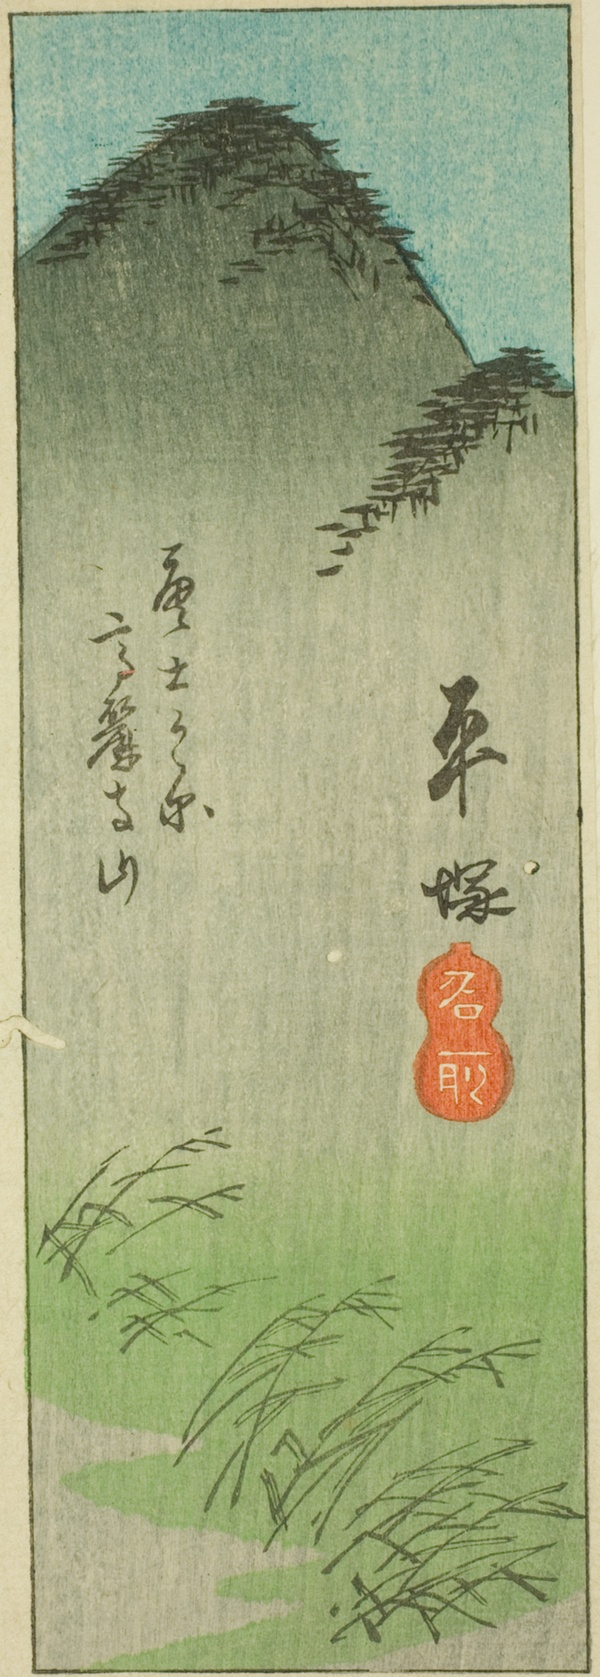 Hiratsuka, section of sheet no. 2 from the series 